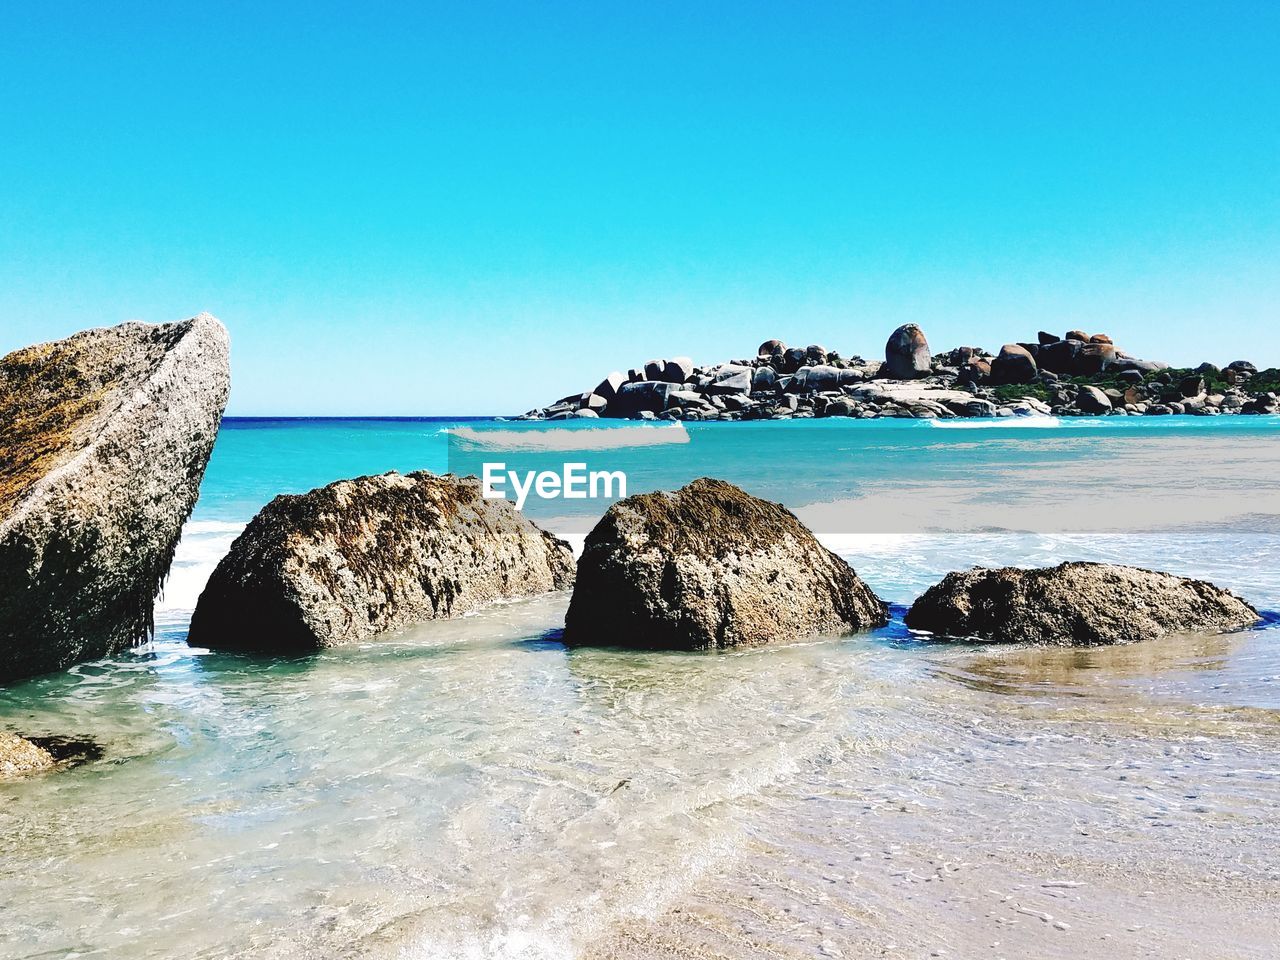 PANORAMIC VIEW OF ROCKS ON BEACH AGAINST CLEAR BLUE SKY